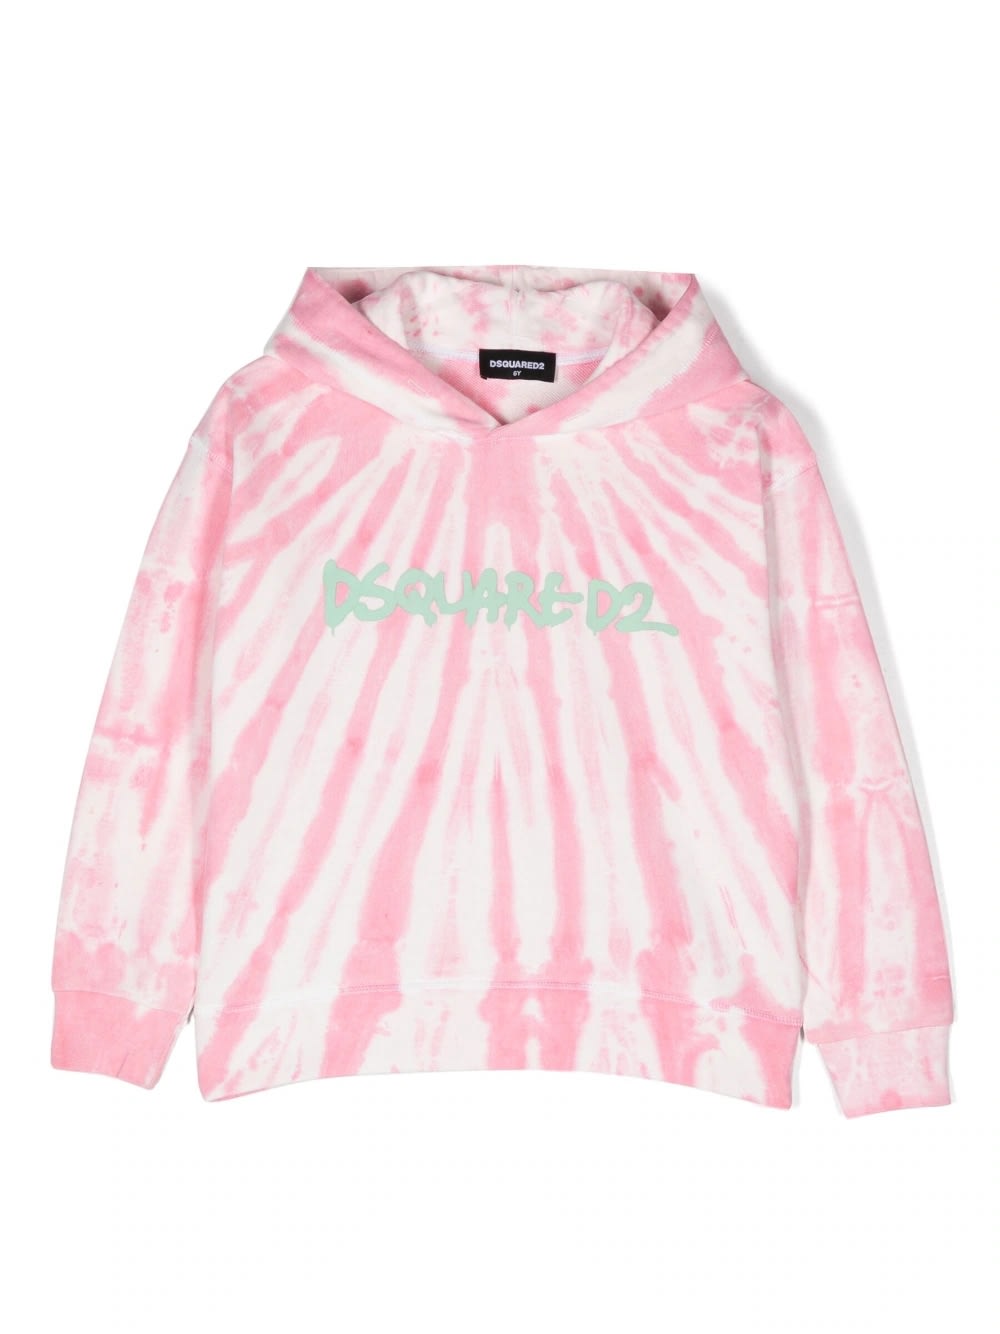 DSQUARED2 SWEATSHIRT WITH LOGO AND TIE-DYE PATTERN